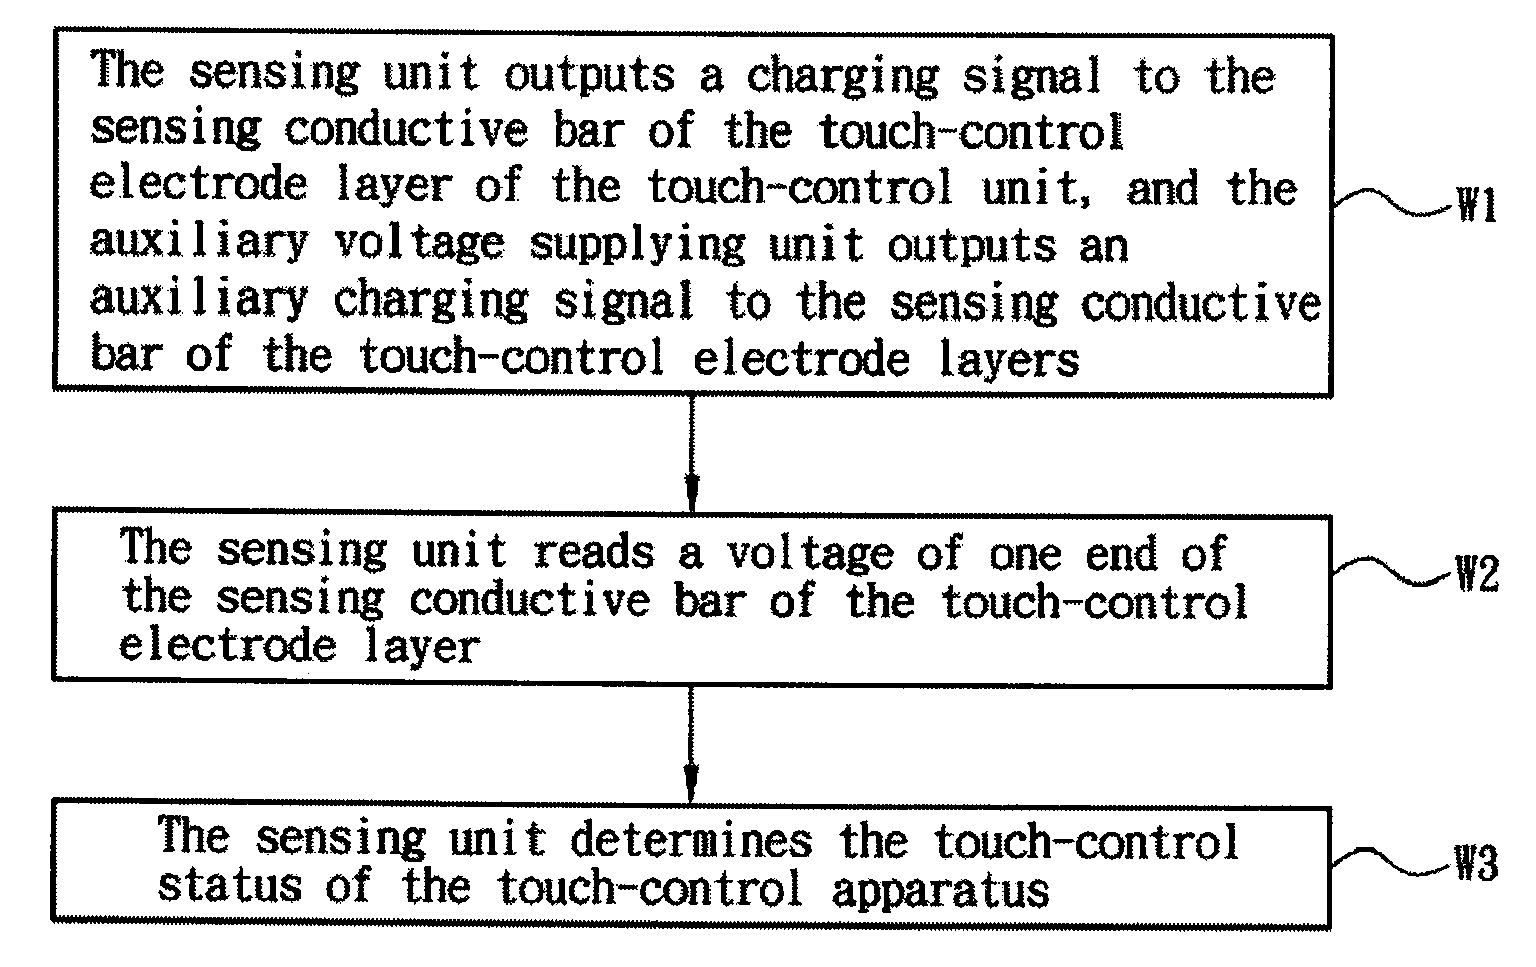 Touch-control apparatus